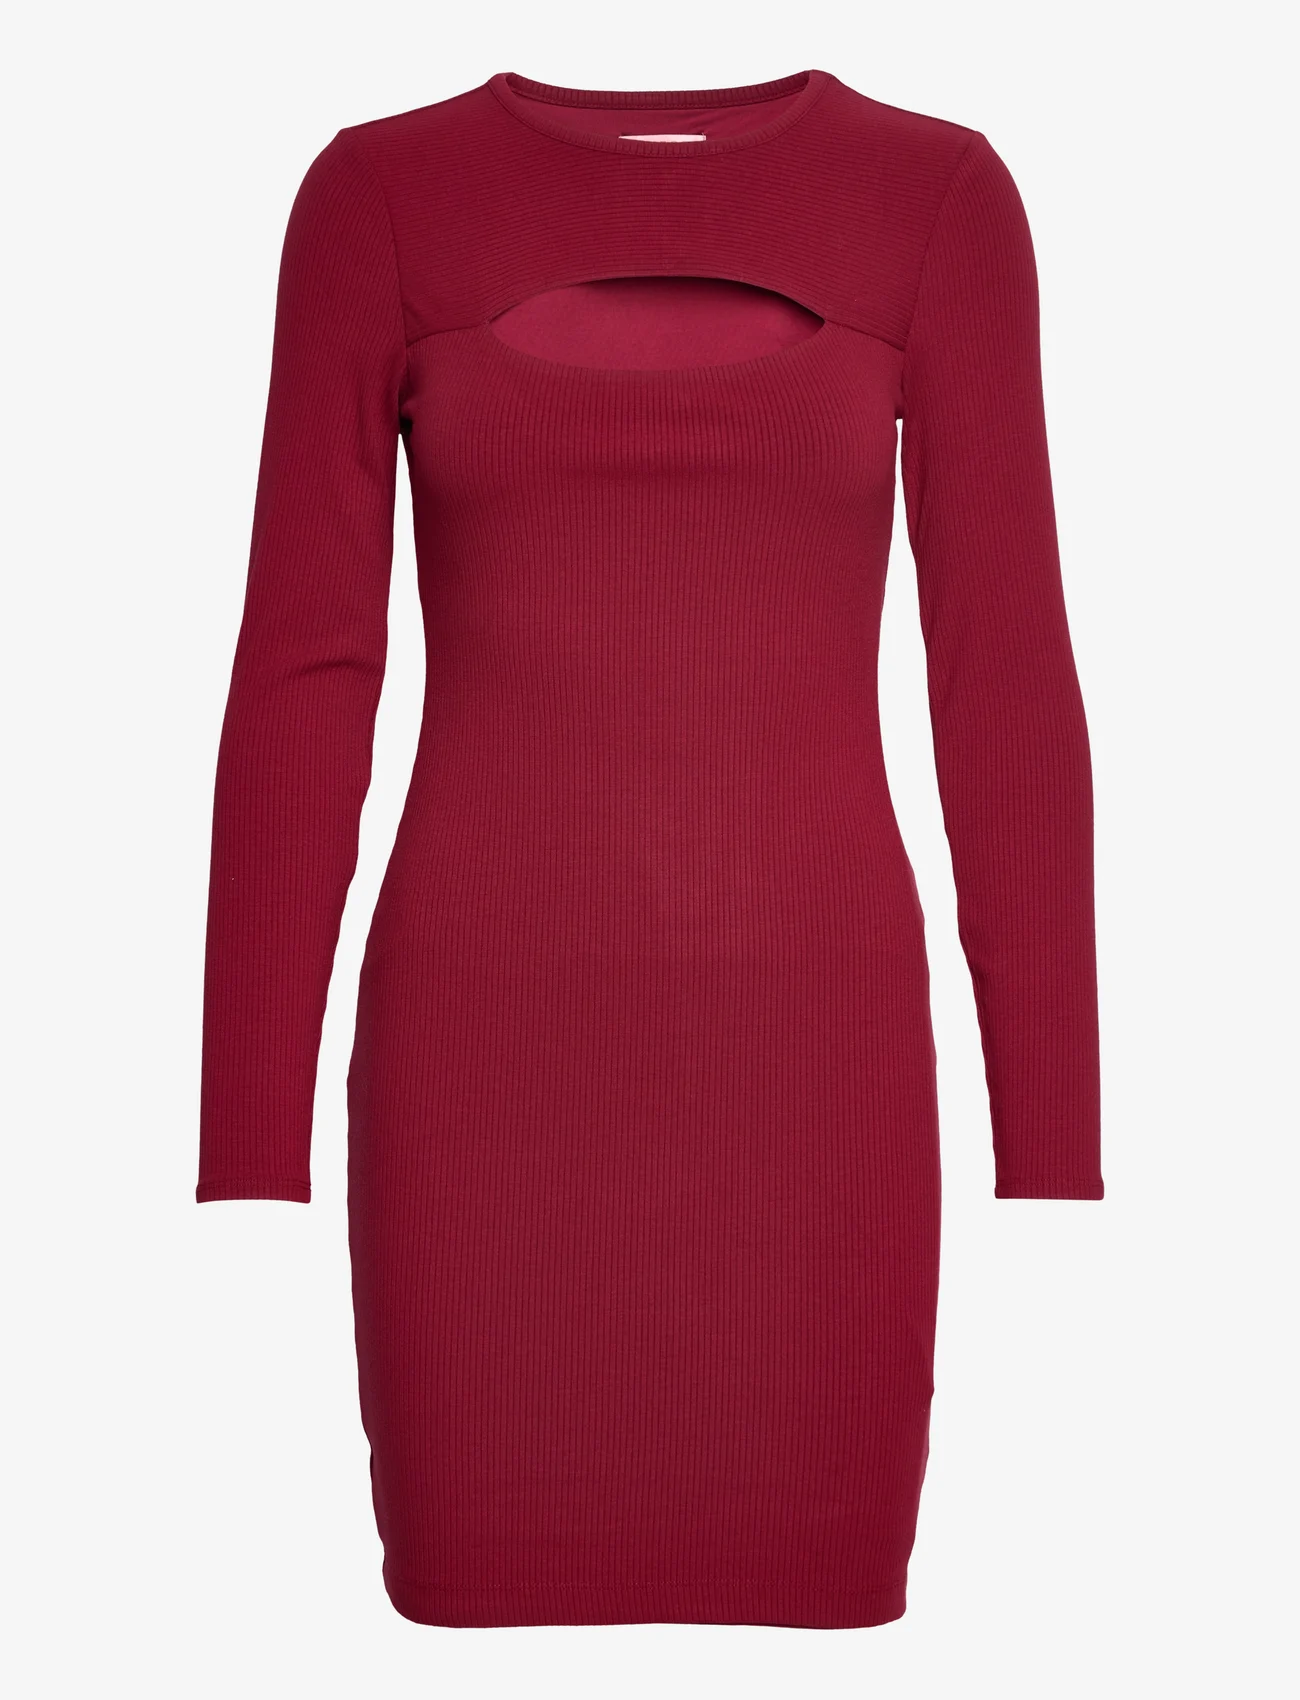 GUESS Jeans - ES LS LANA DRESS - bodycon dresses - beet juice red - 0